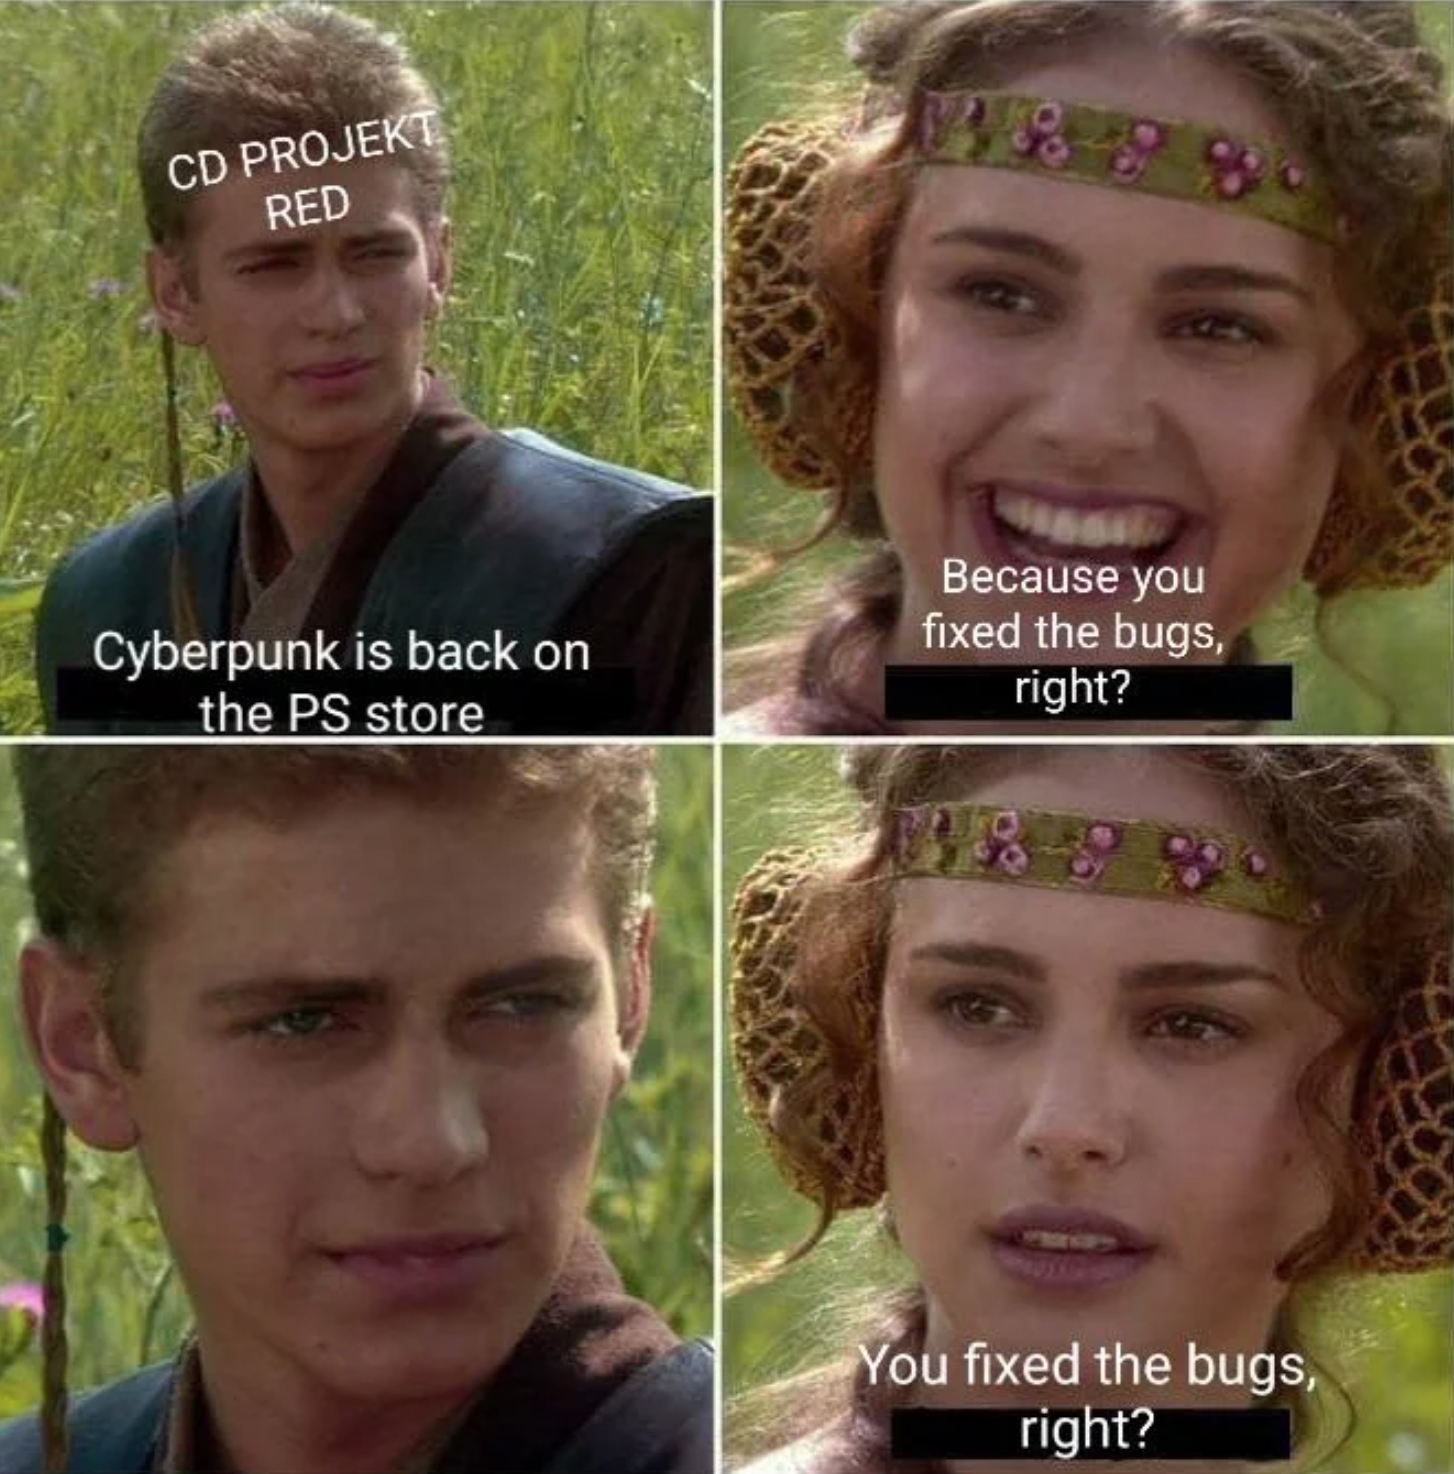 funny gaming memes - anakin and padme meme - Cd Projekt Red Cyberpunk is back on the Ps store Because you fixed the bugs, right? You fixed the bugs, right?